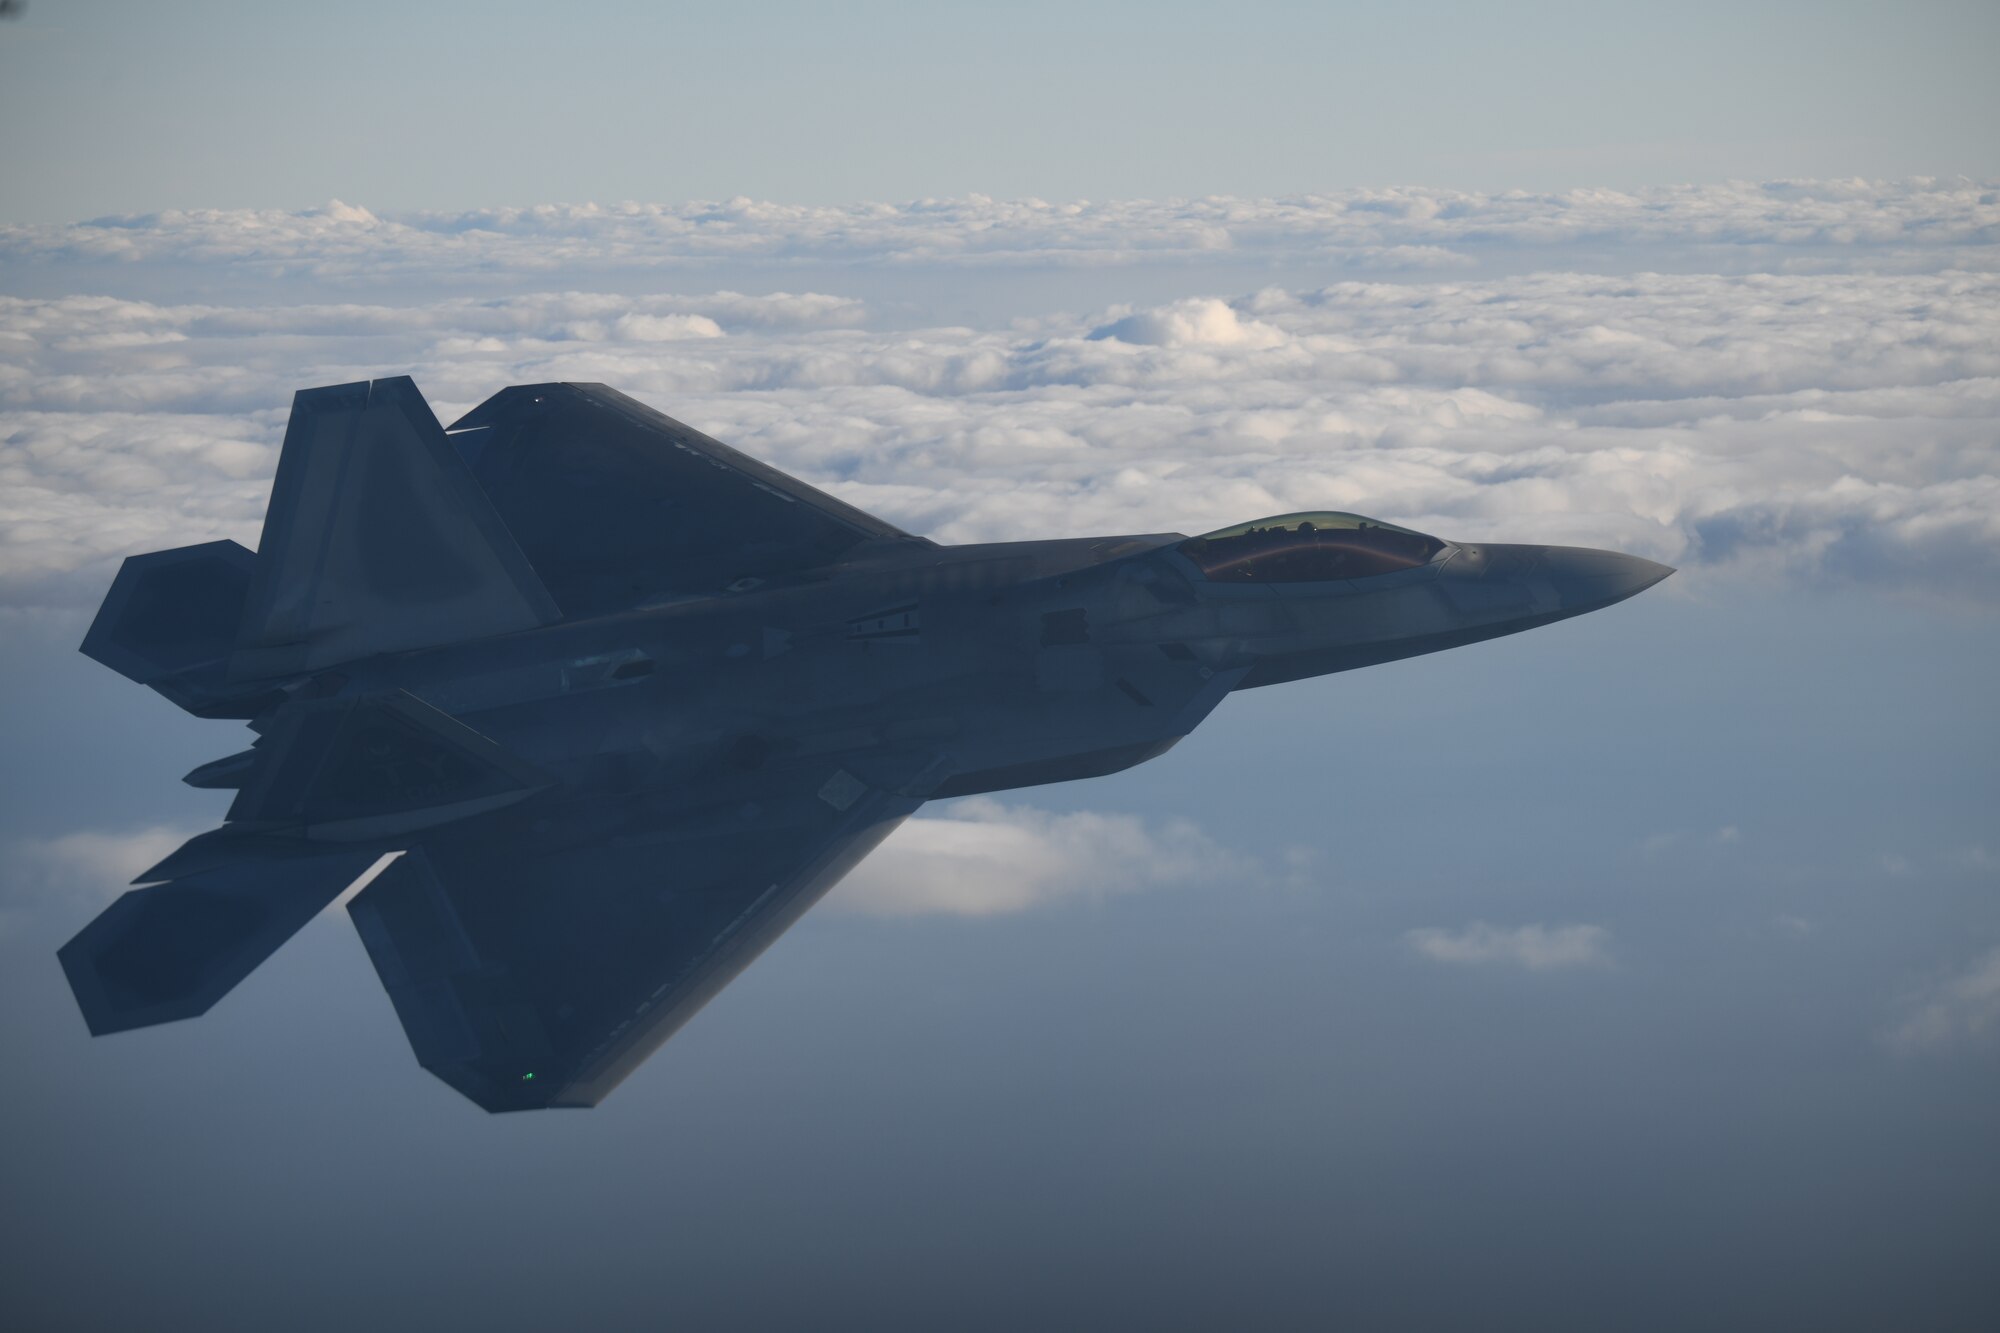 An  F-22 Raptor with the 325th Fighter Wing, Tyndall Air Force Base, Fla.  flies over the Gulf of Mexico, Dec. 10, 2020. Tyndall AFB is one of the few Air Force bases with direct access to the area, making it the perfect host for large-scale exercises and training missions. (U.S. Air Force photo by Airman 1st Class Tiffany Price)